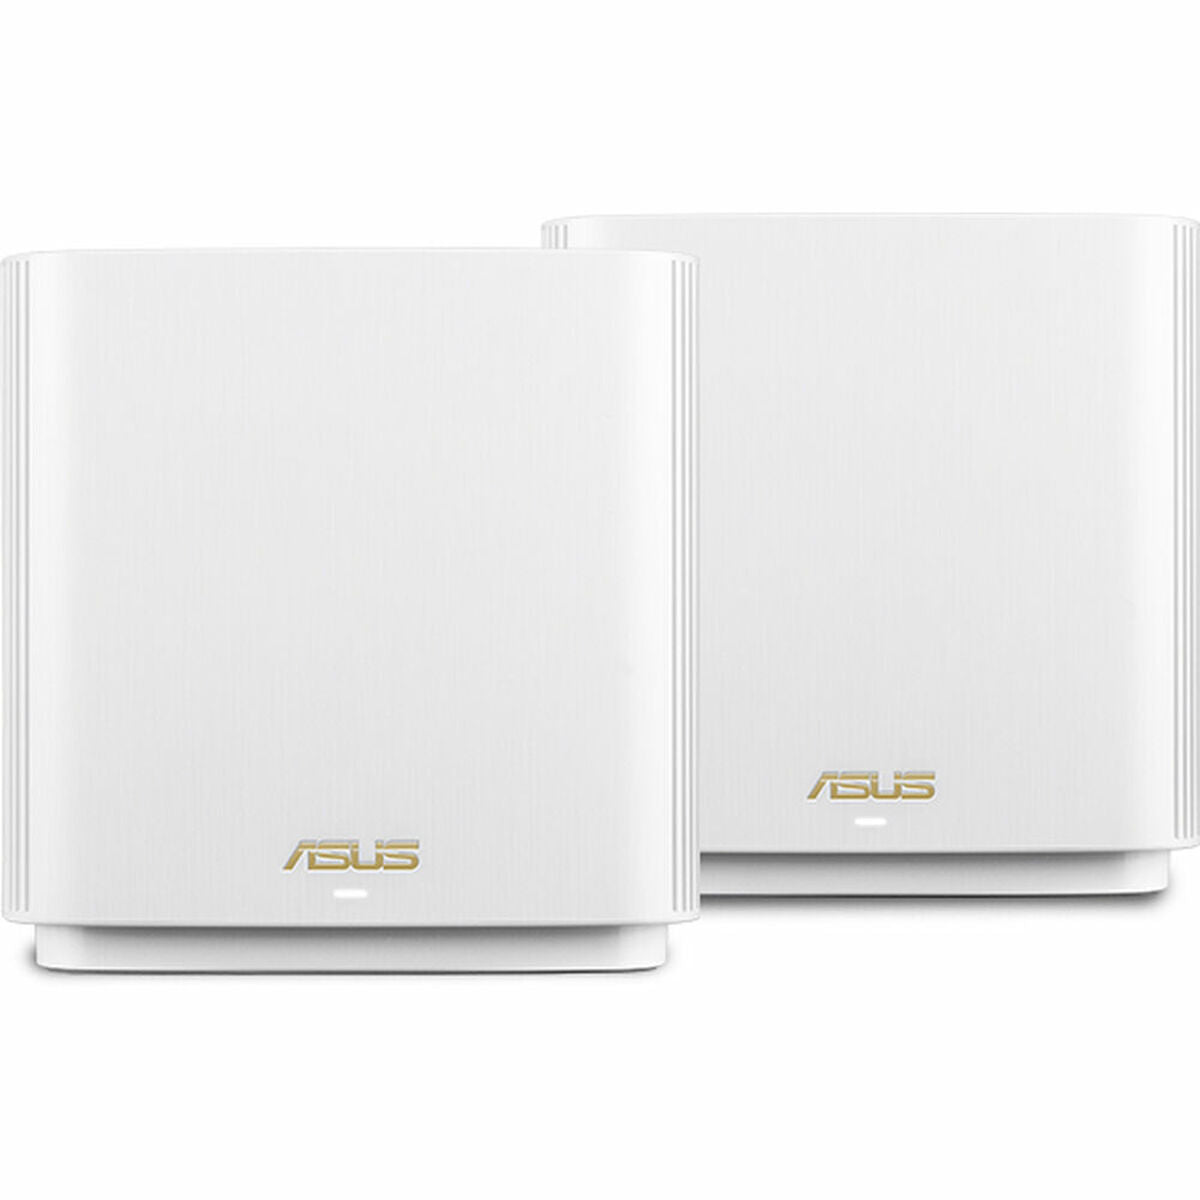 Router Asus ZenWiFi AX (XT8), Asus, Computing, Network devices, router-asus-zenwifi-ax-xt8-1, Brand_Asus, category-reference-2609, category-reference-2803, category-reference-2826, category-reference-t-19685, category-reference-t-19914, Condition_NEW, networks/wiring, Price_400 - 500, Teleworking, RiotNook